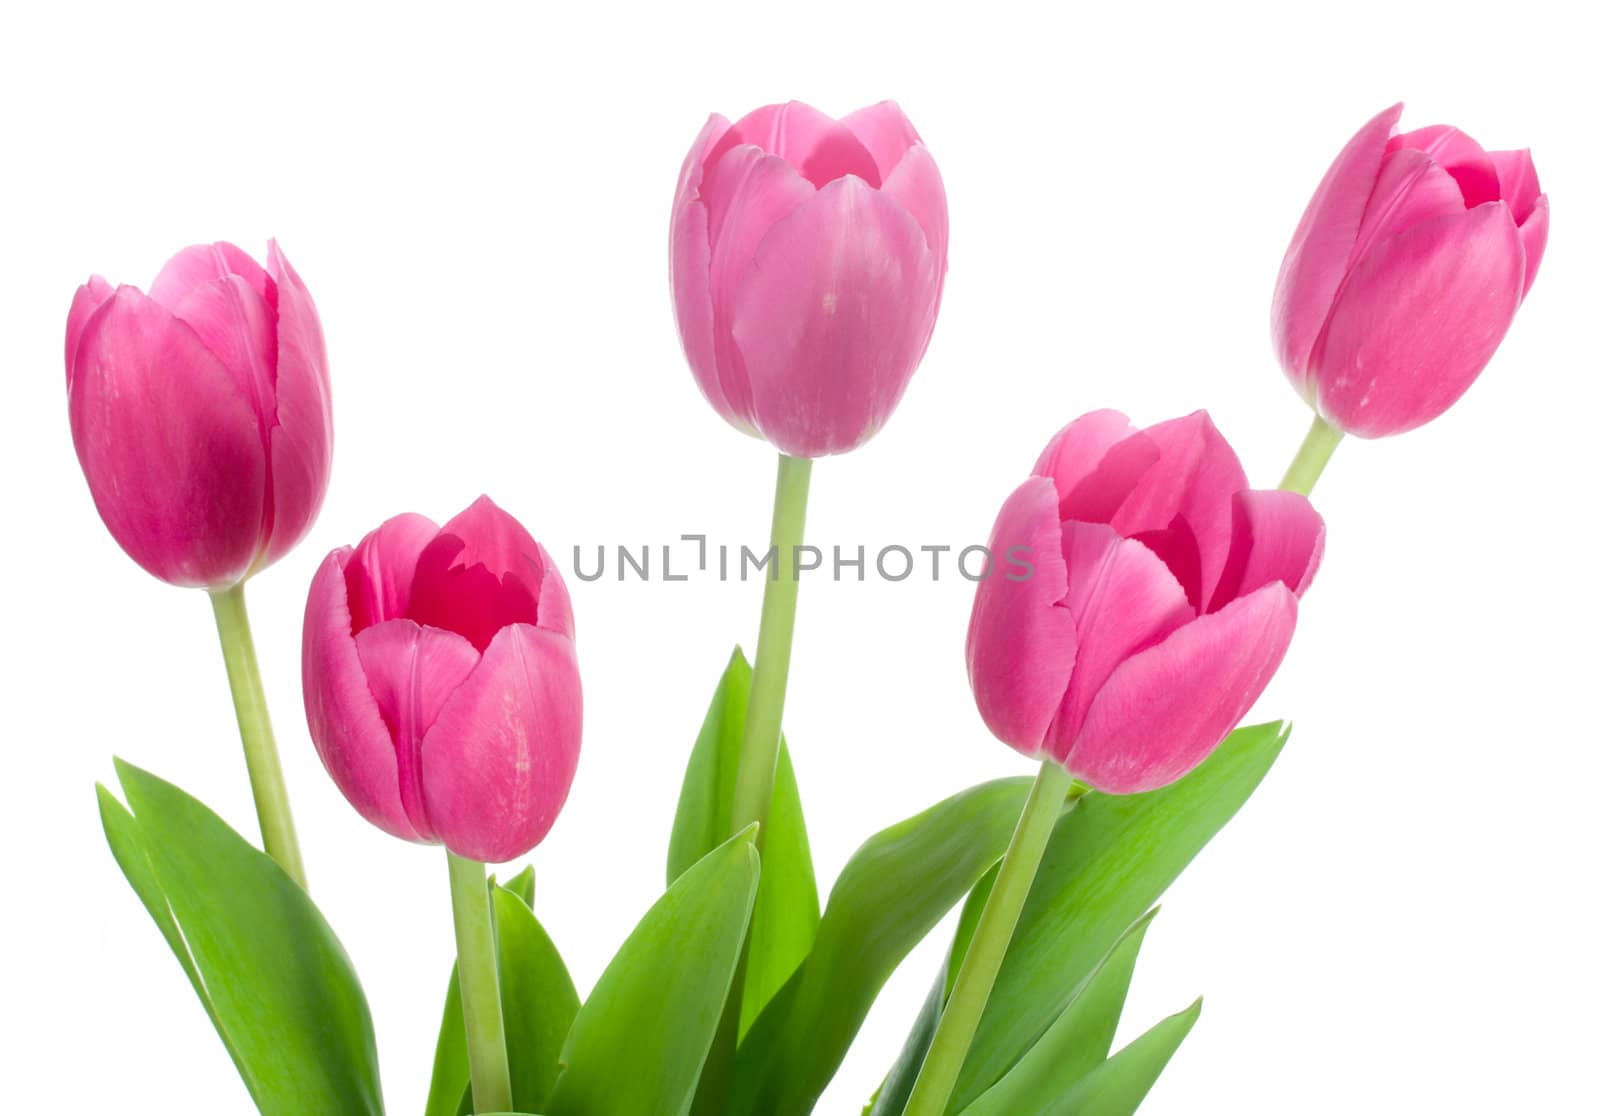 bouquet from five pink tulips by Alekcey